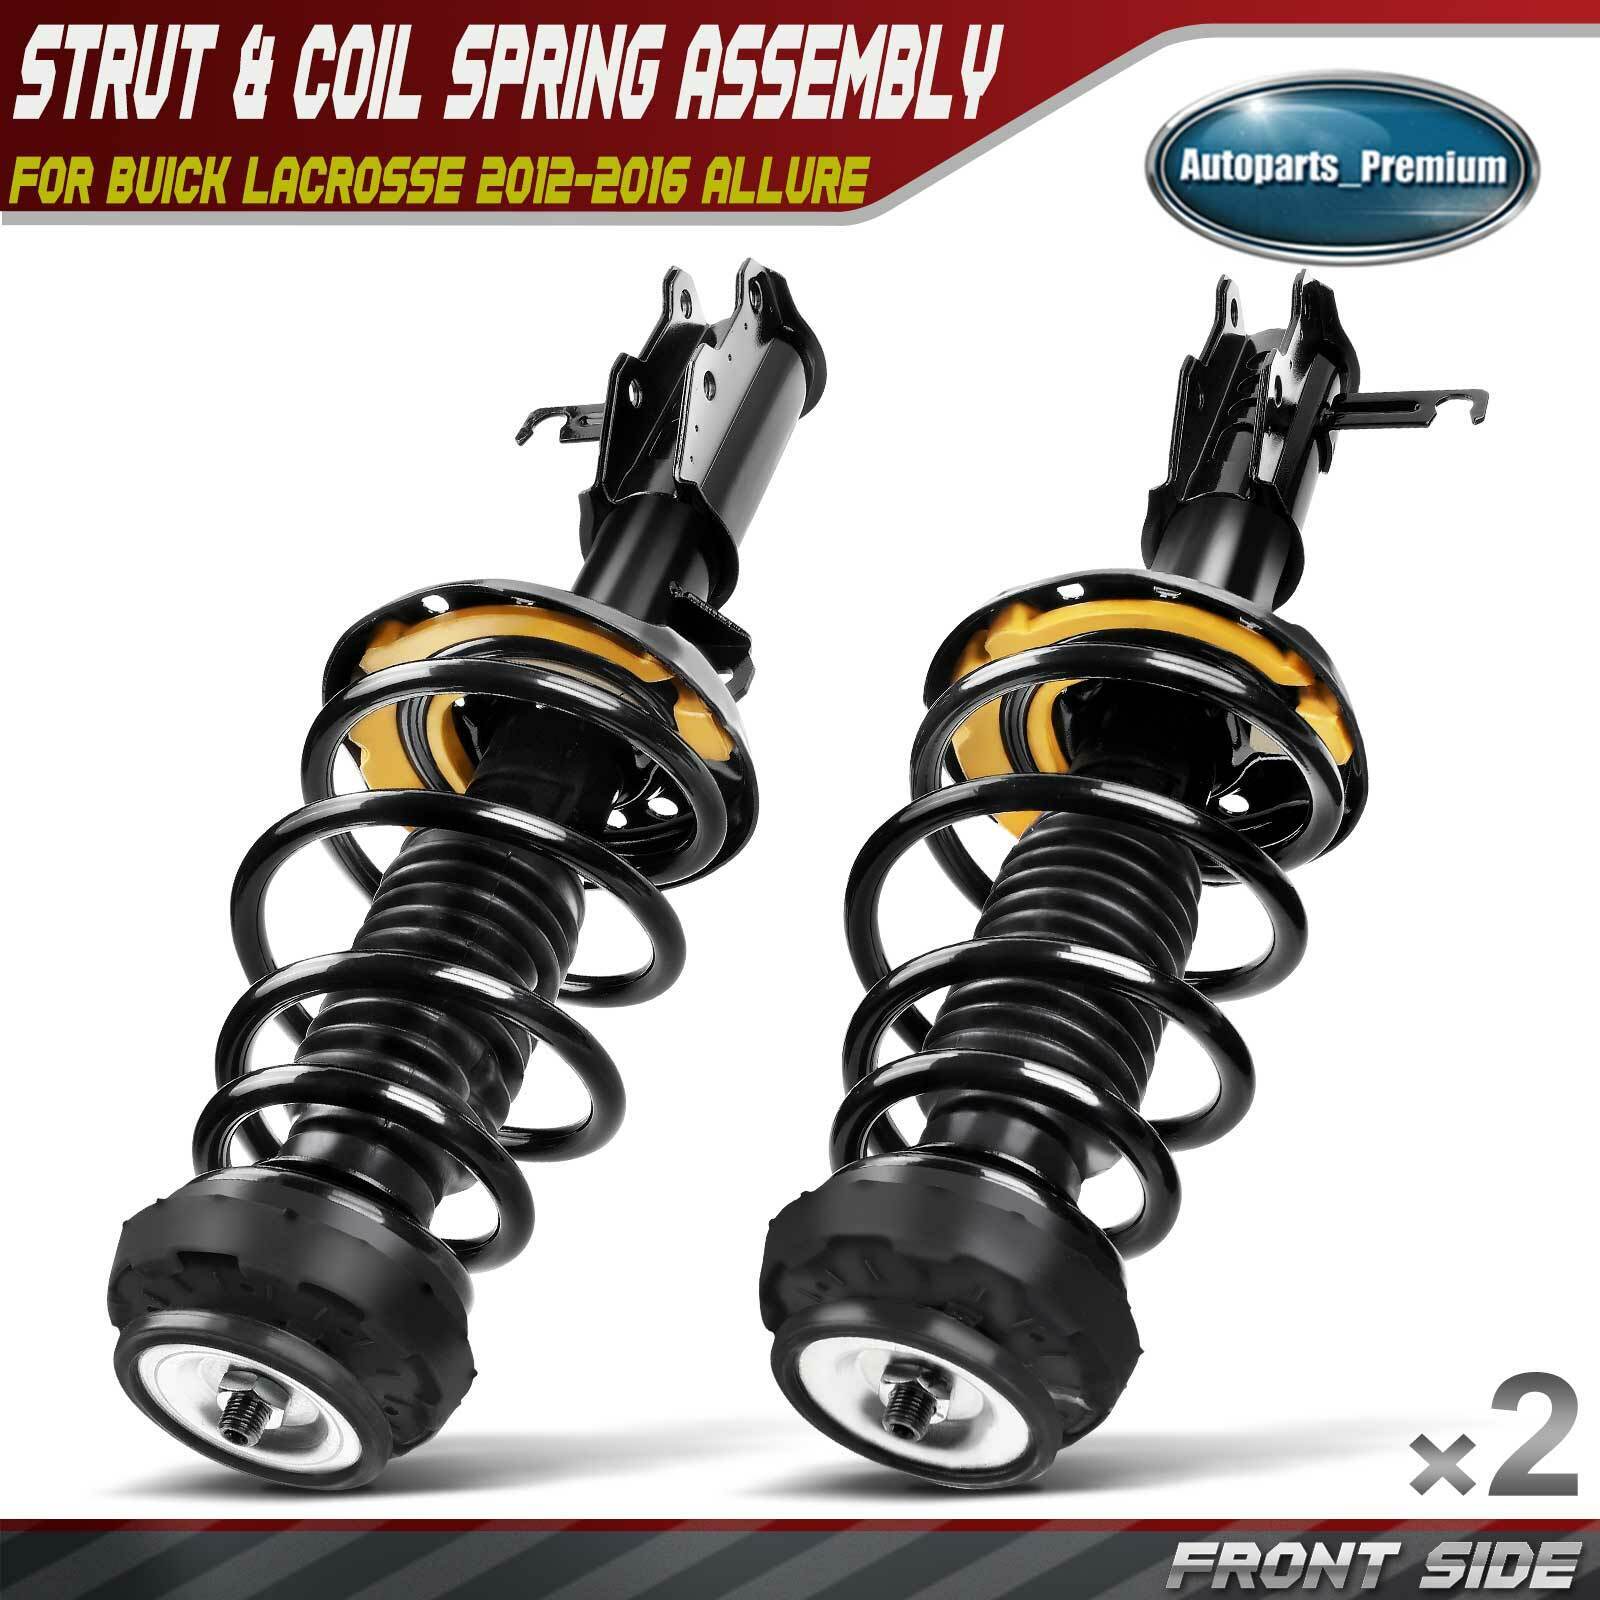 2x Front Complete Strut & Coil Spring Assembly for Buick LaCrosse 2012-2016 AWD